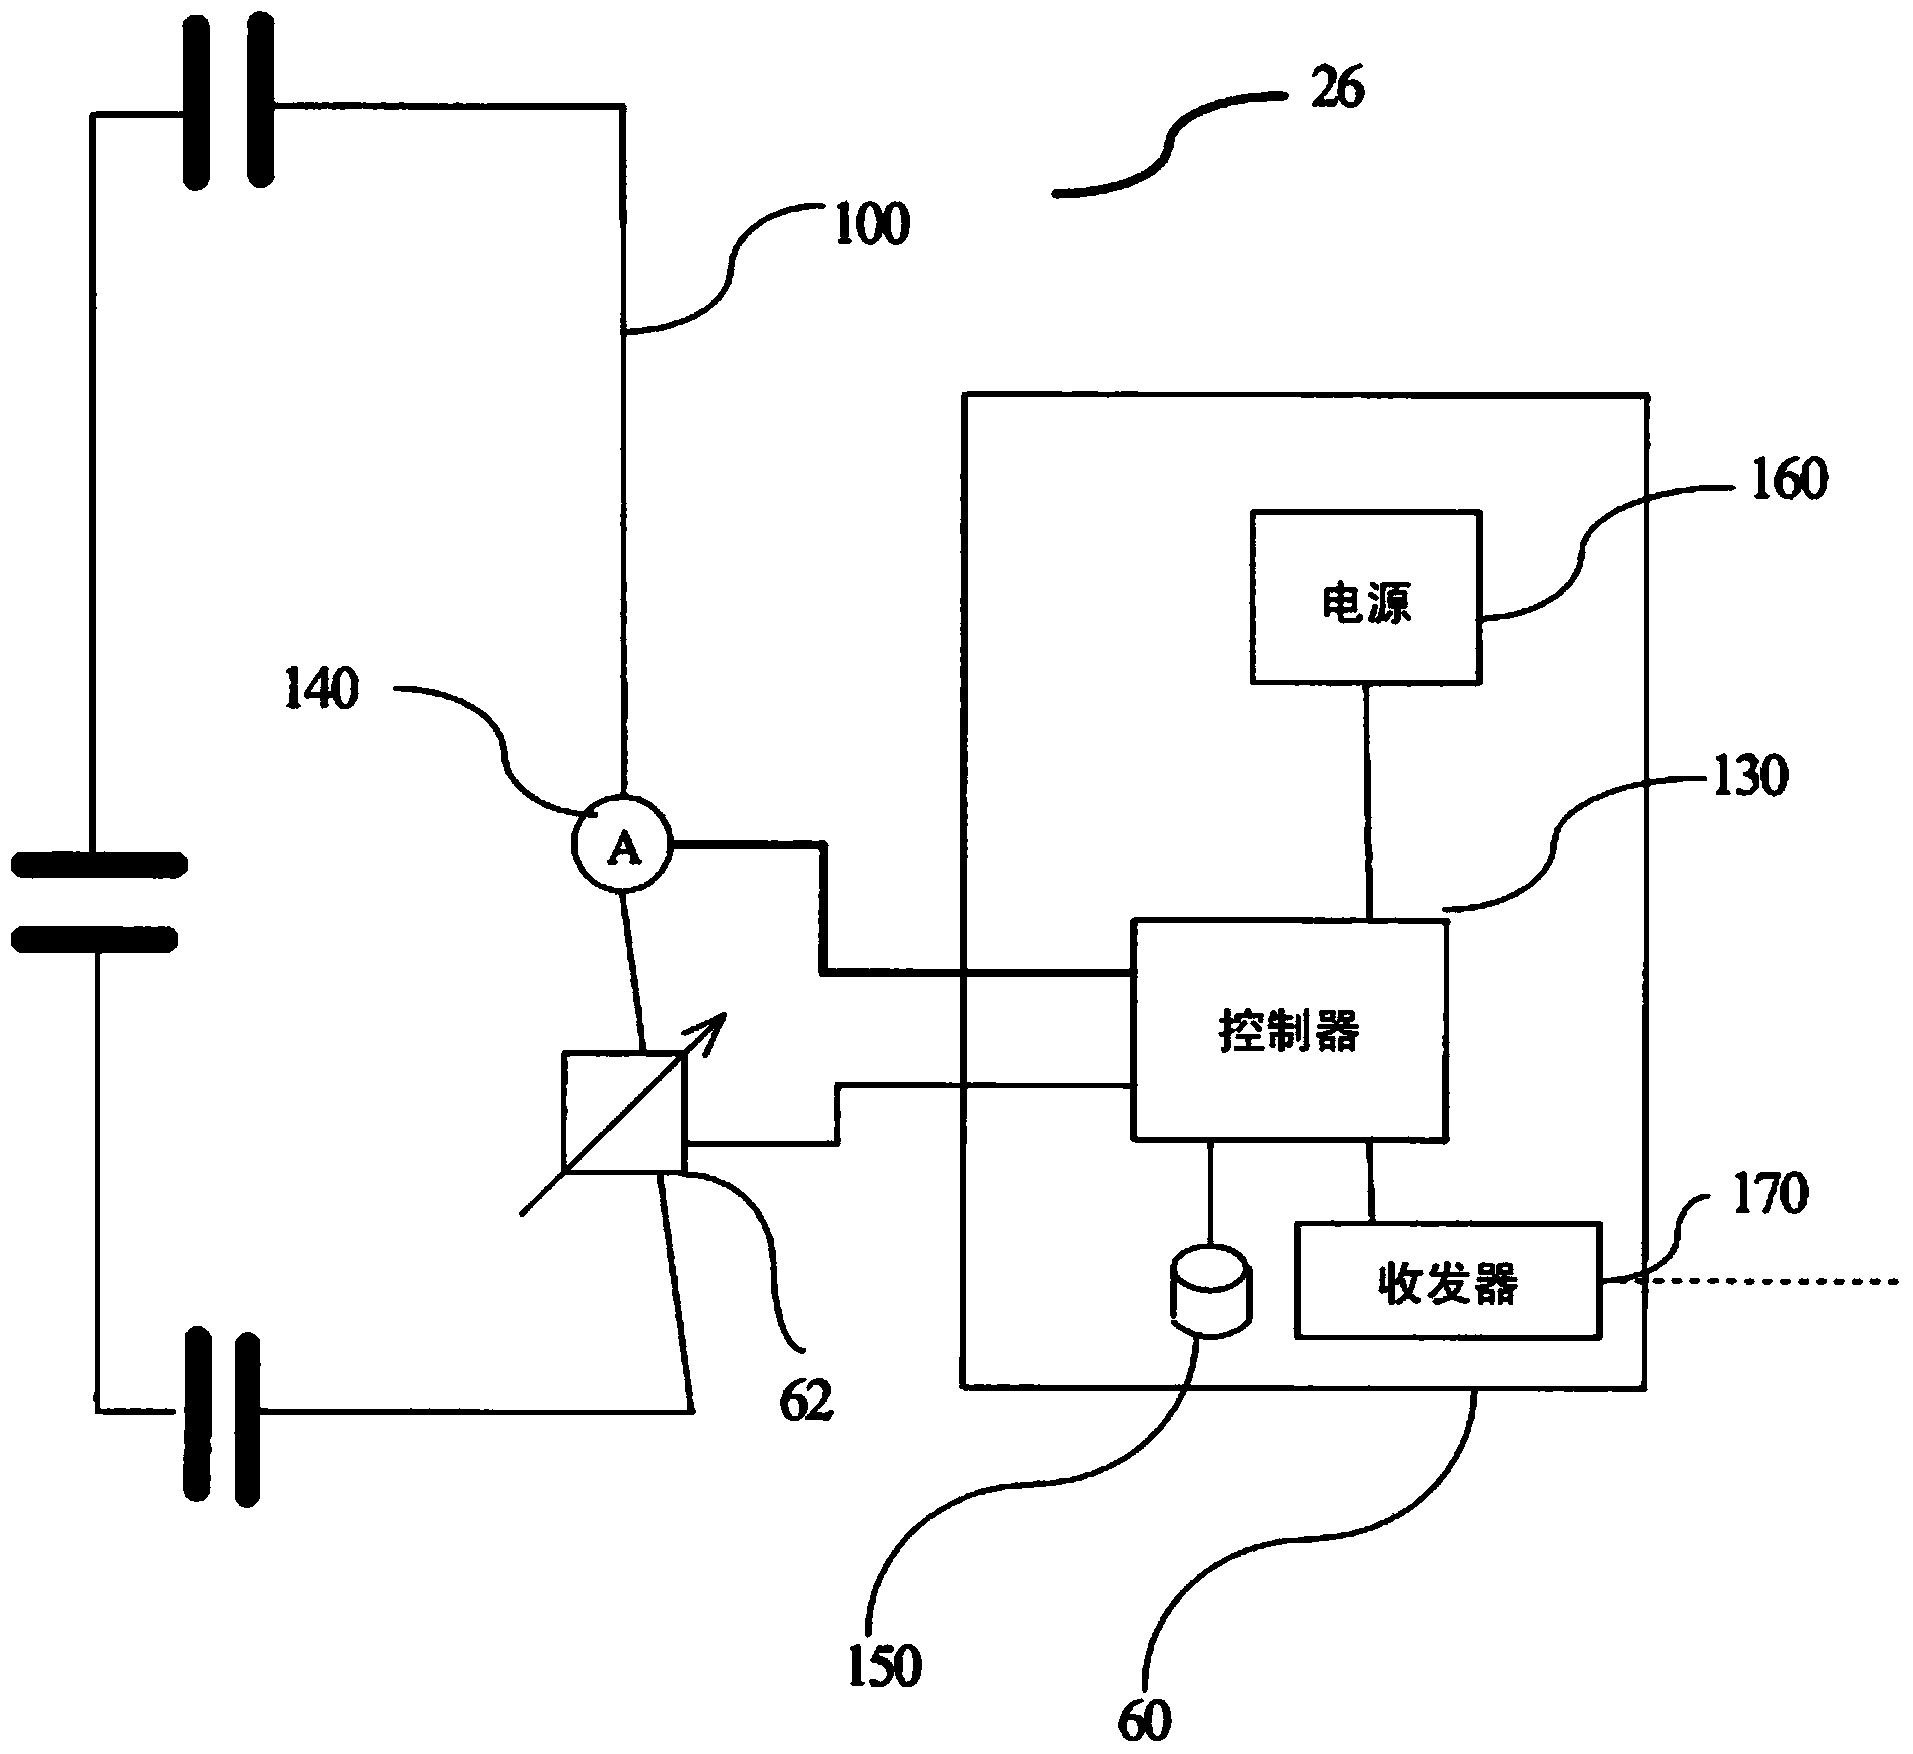 Wireless local transmit coils and array with controllable load